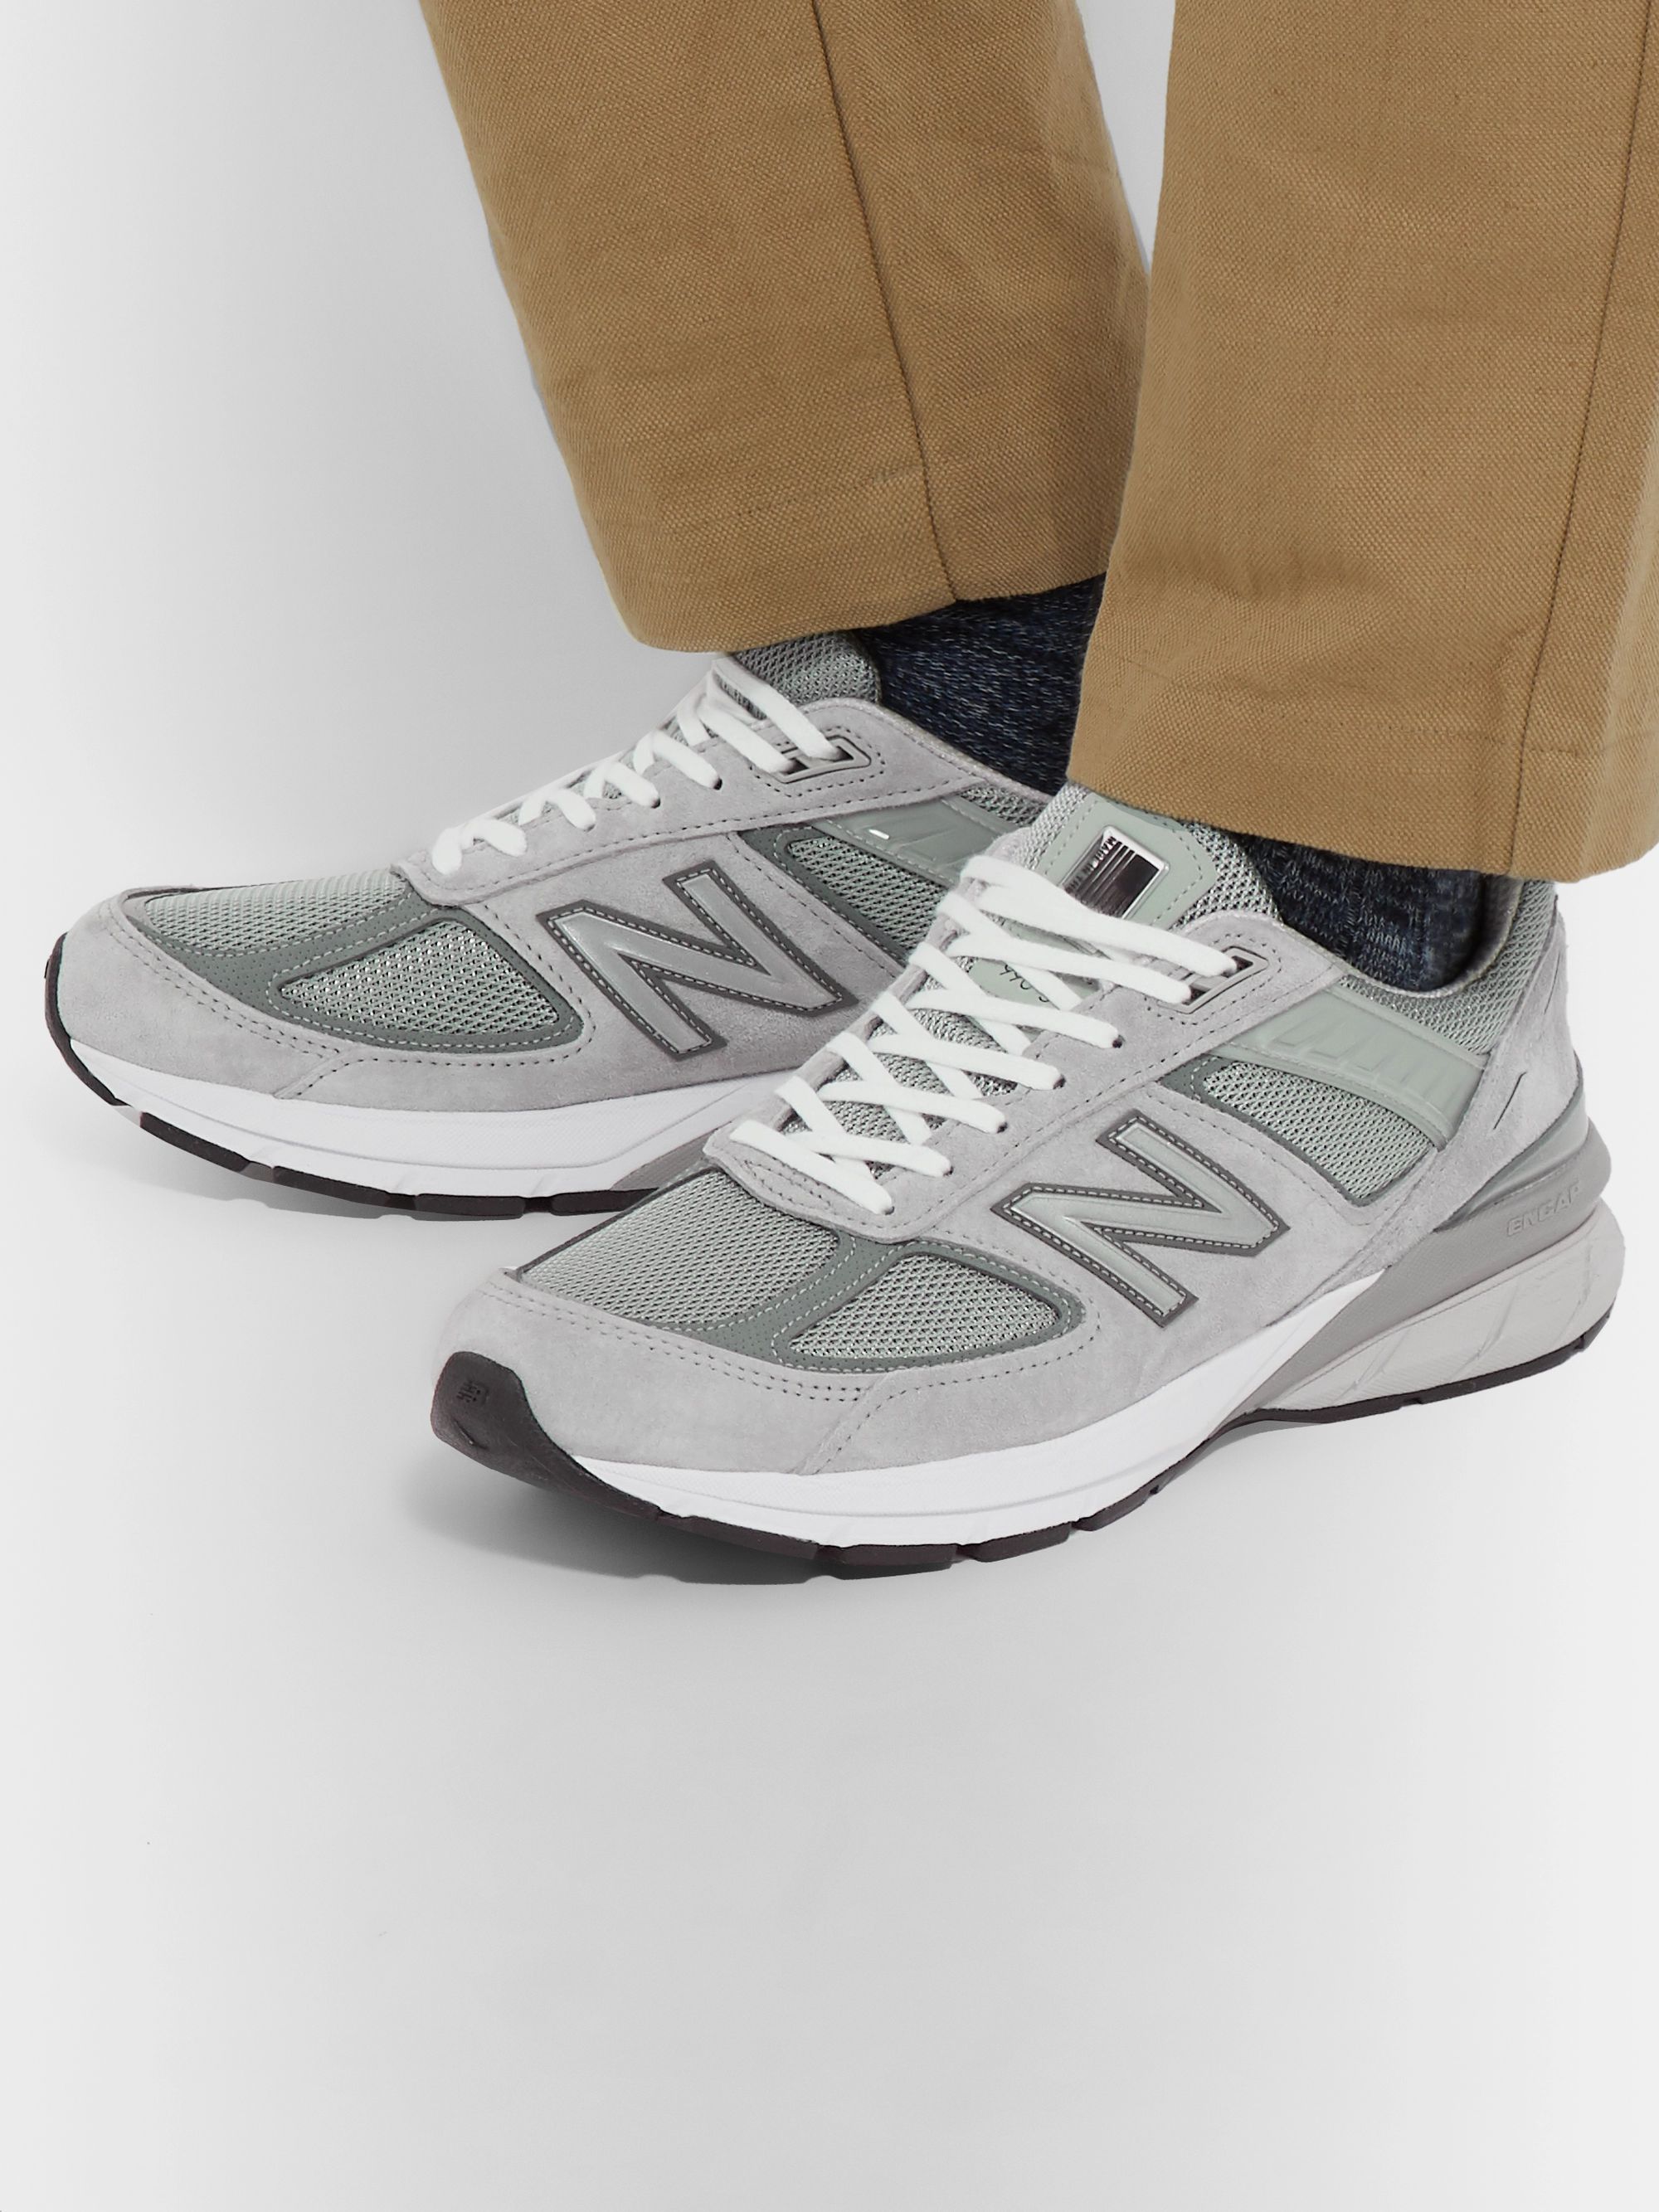 Gray M990v5 Suede and Mesh Sneakers | NEW BALANCE | MR PORTER